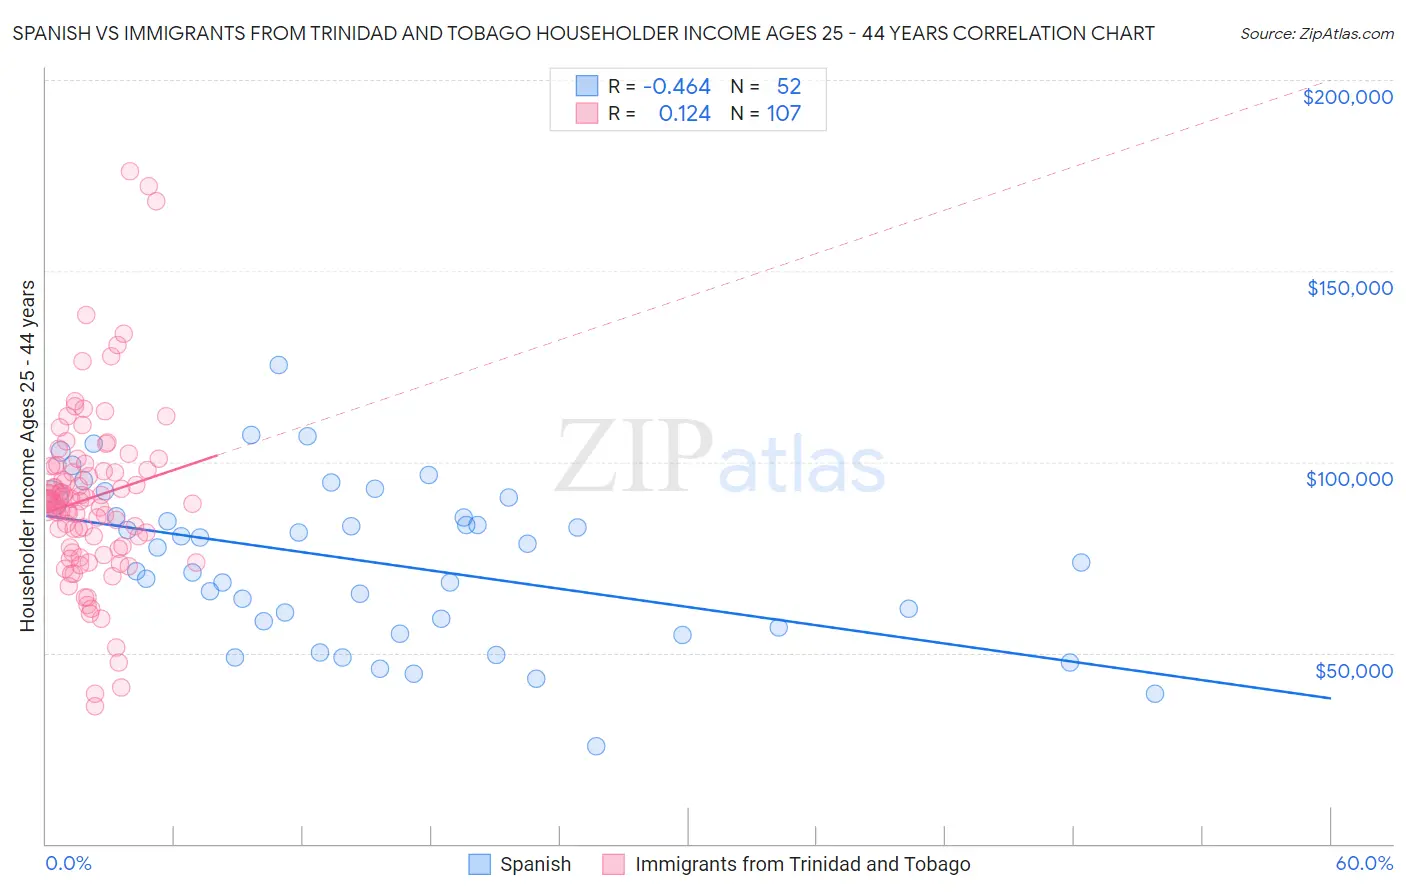 Spanish vs Immigrants from Trinidad and Tobago Householder Income Ages 25 - 44 years